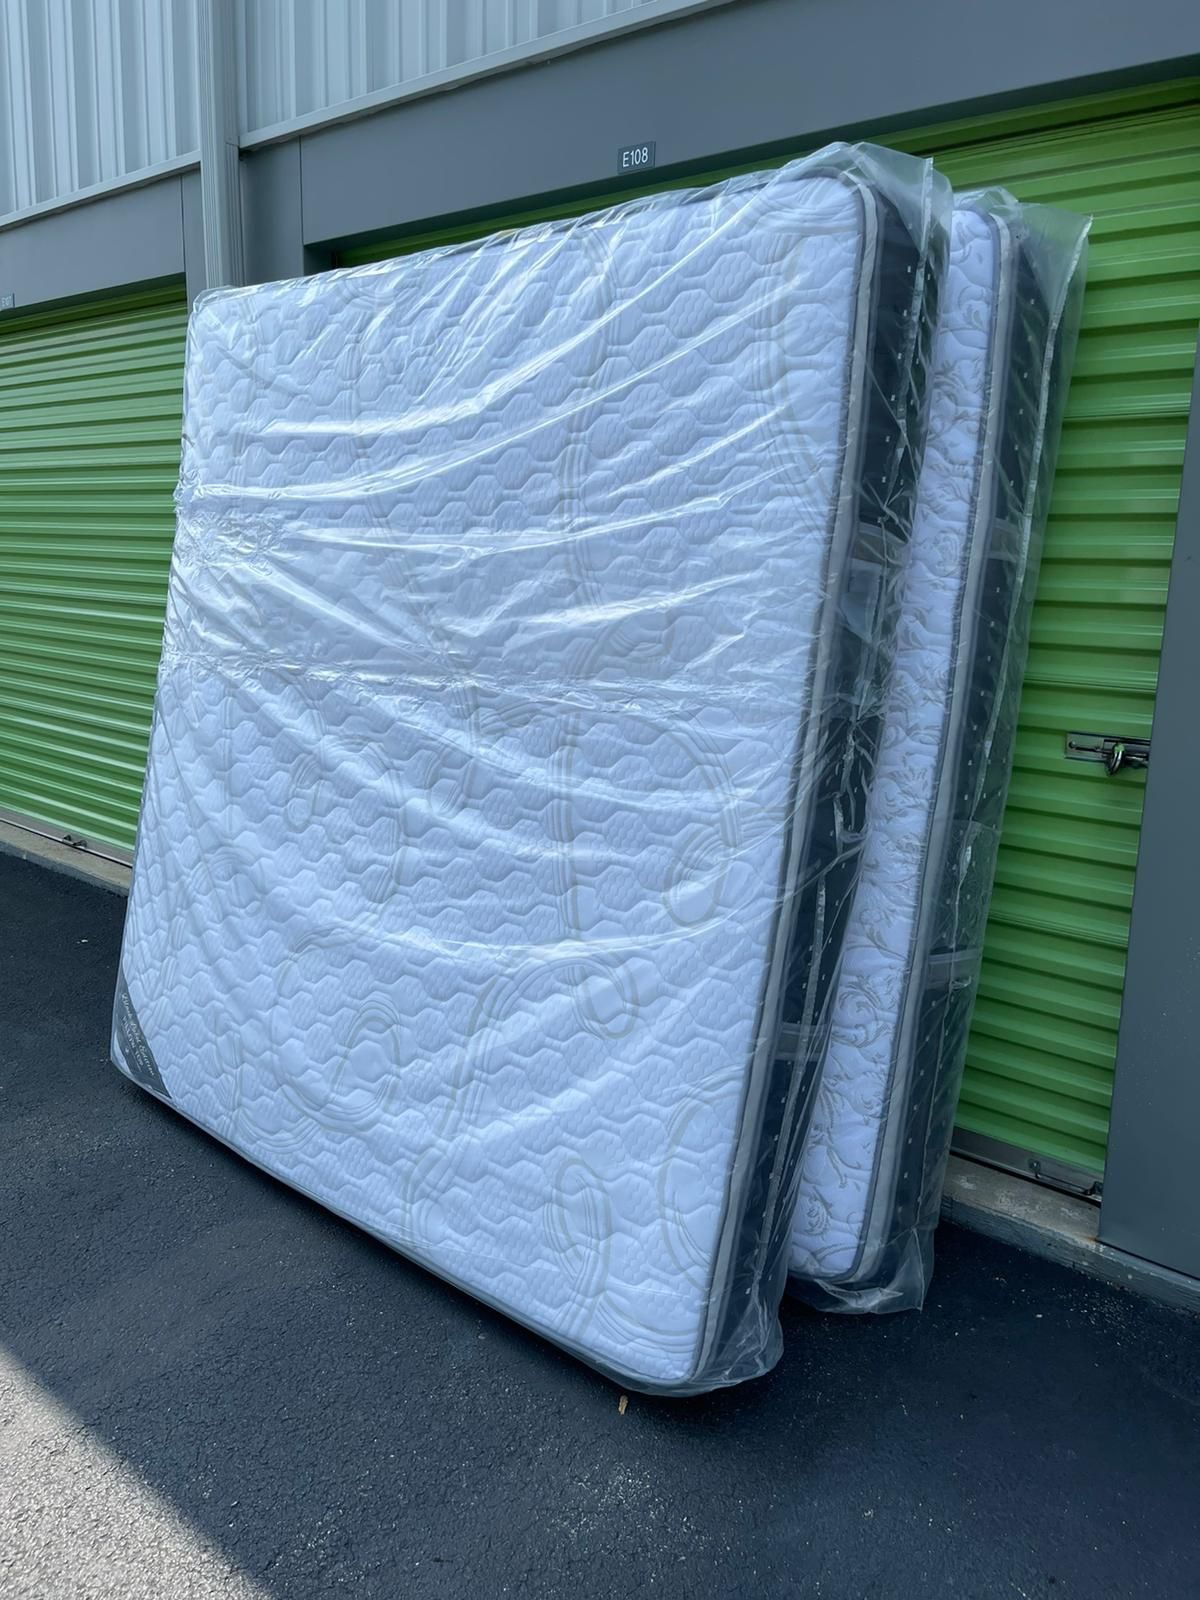 BRAND NEW KING SIZE PILLOW TOP MATTRESS AND SPLIT BOXSPRING INCLUDED - Delivery Available To All Cities  🚚